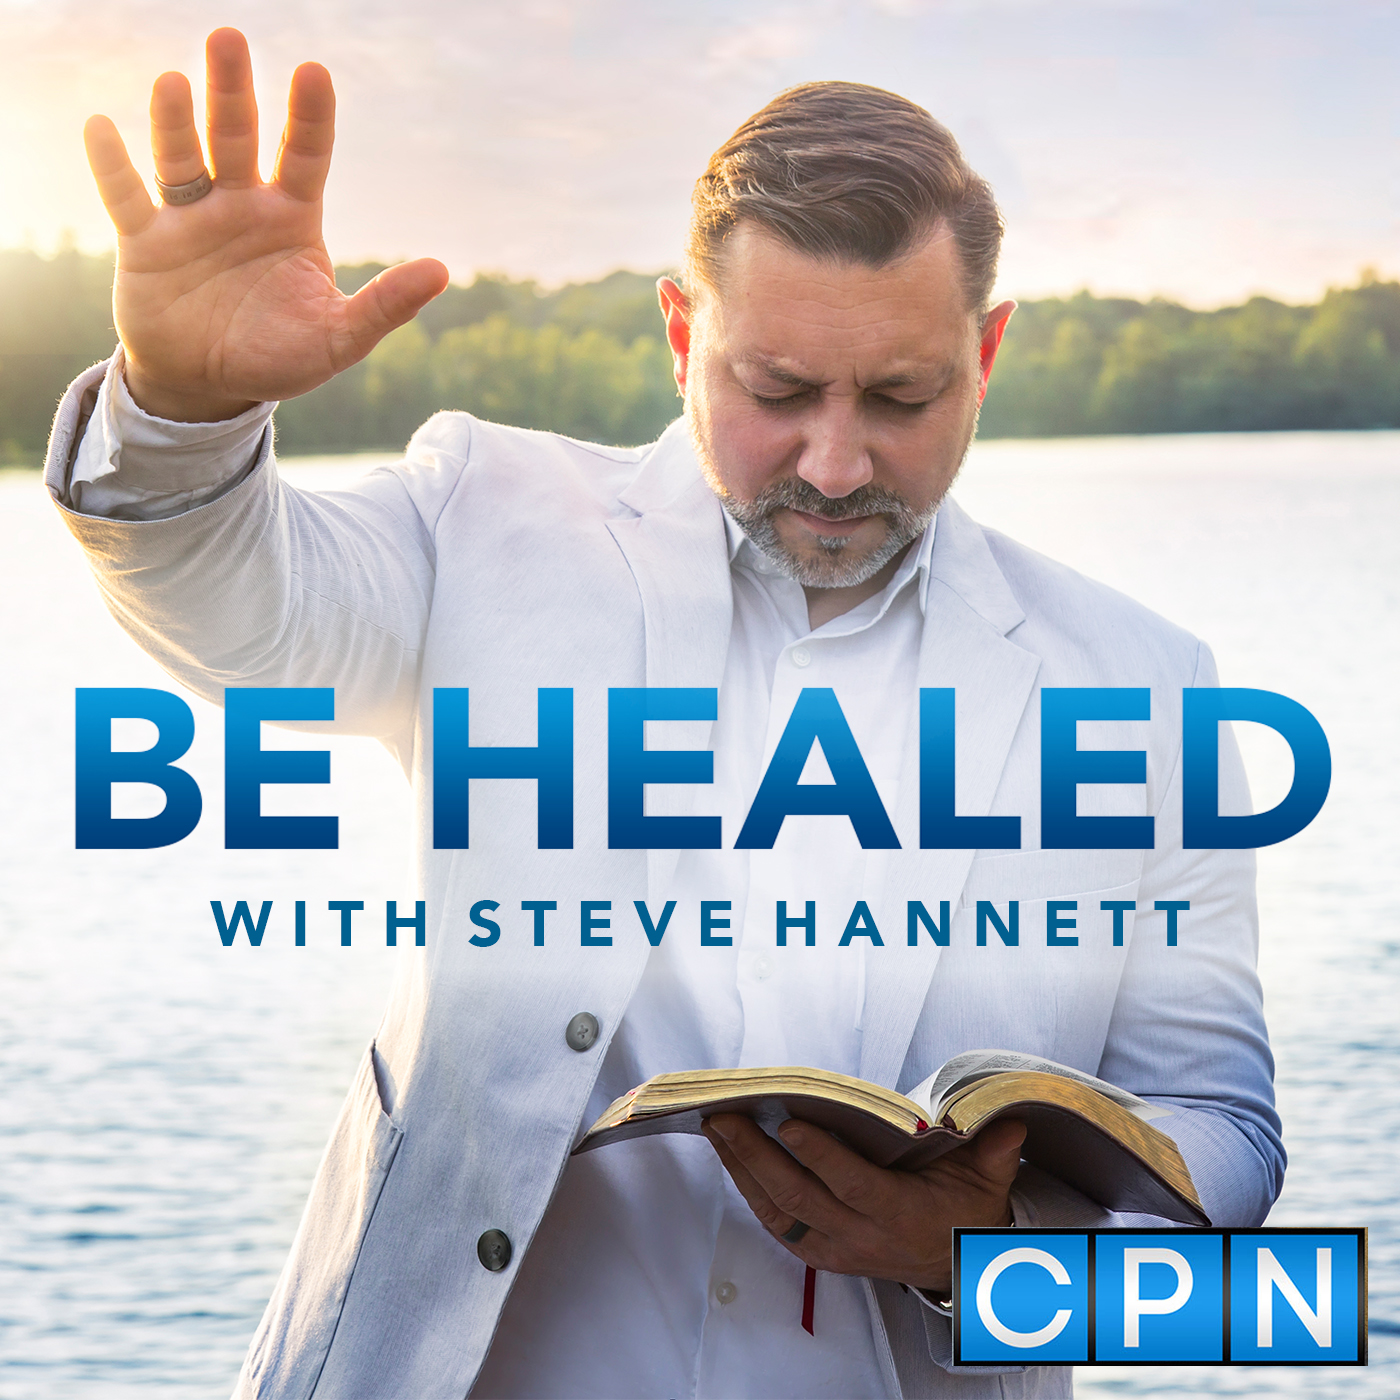 Why Forgiveness Provides Healing-Part 1  (Episode 44)